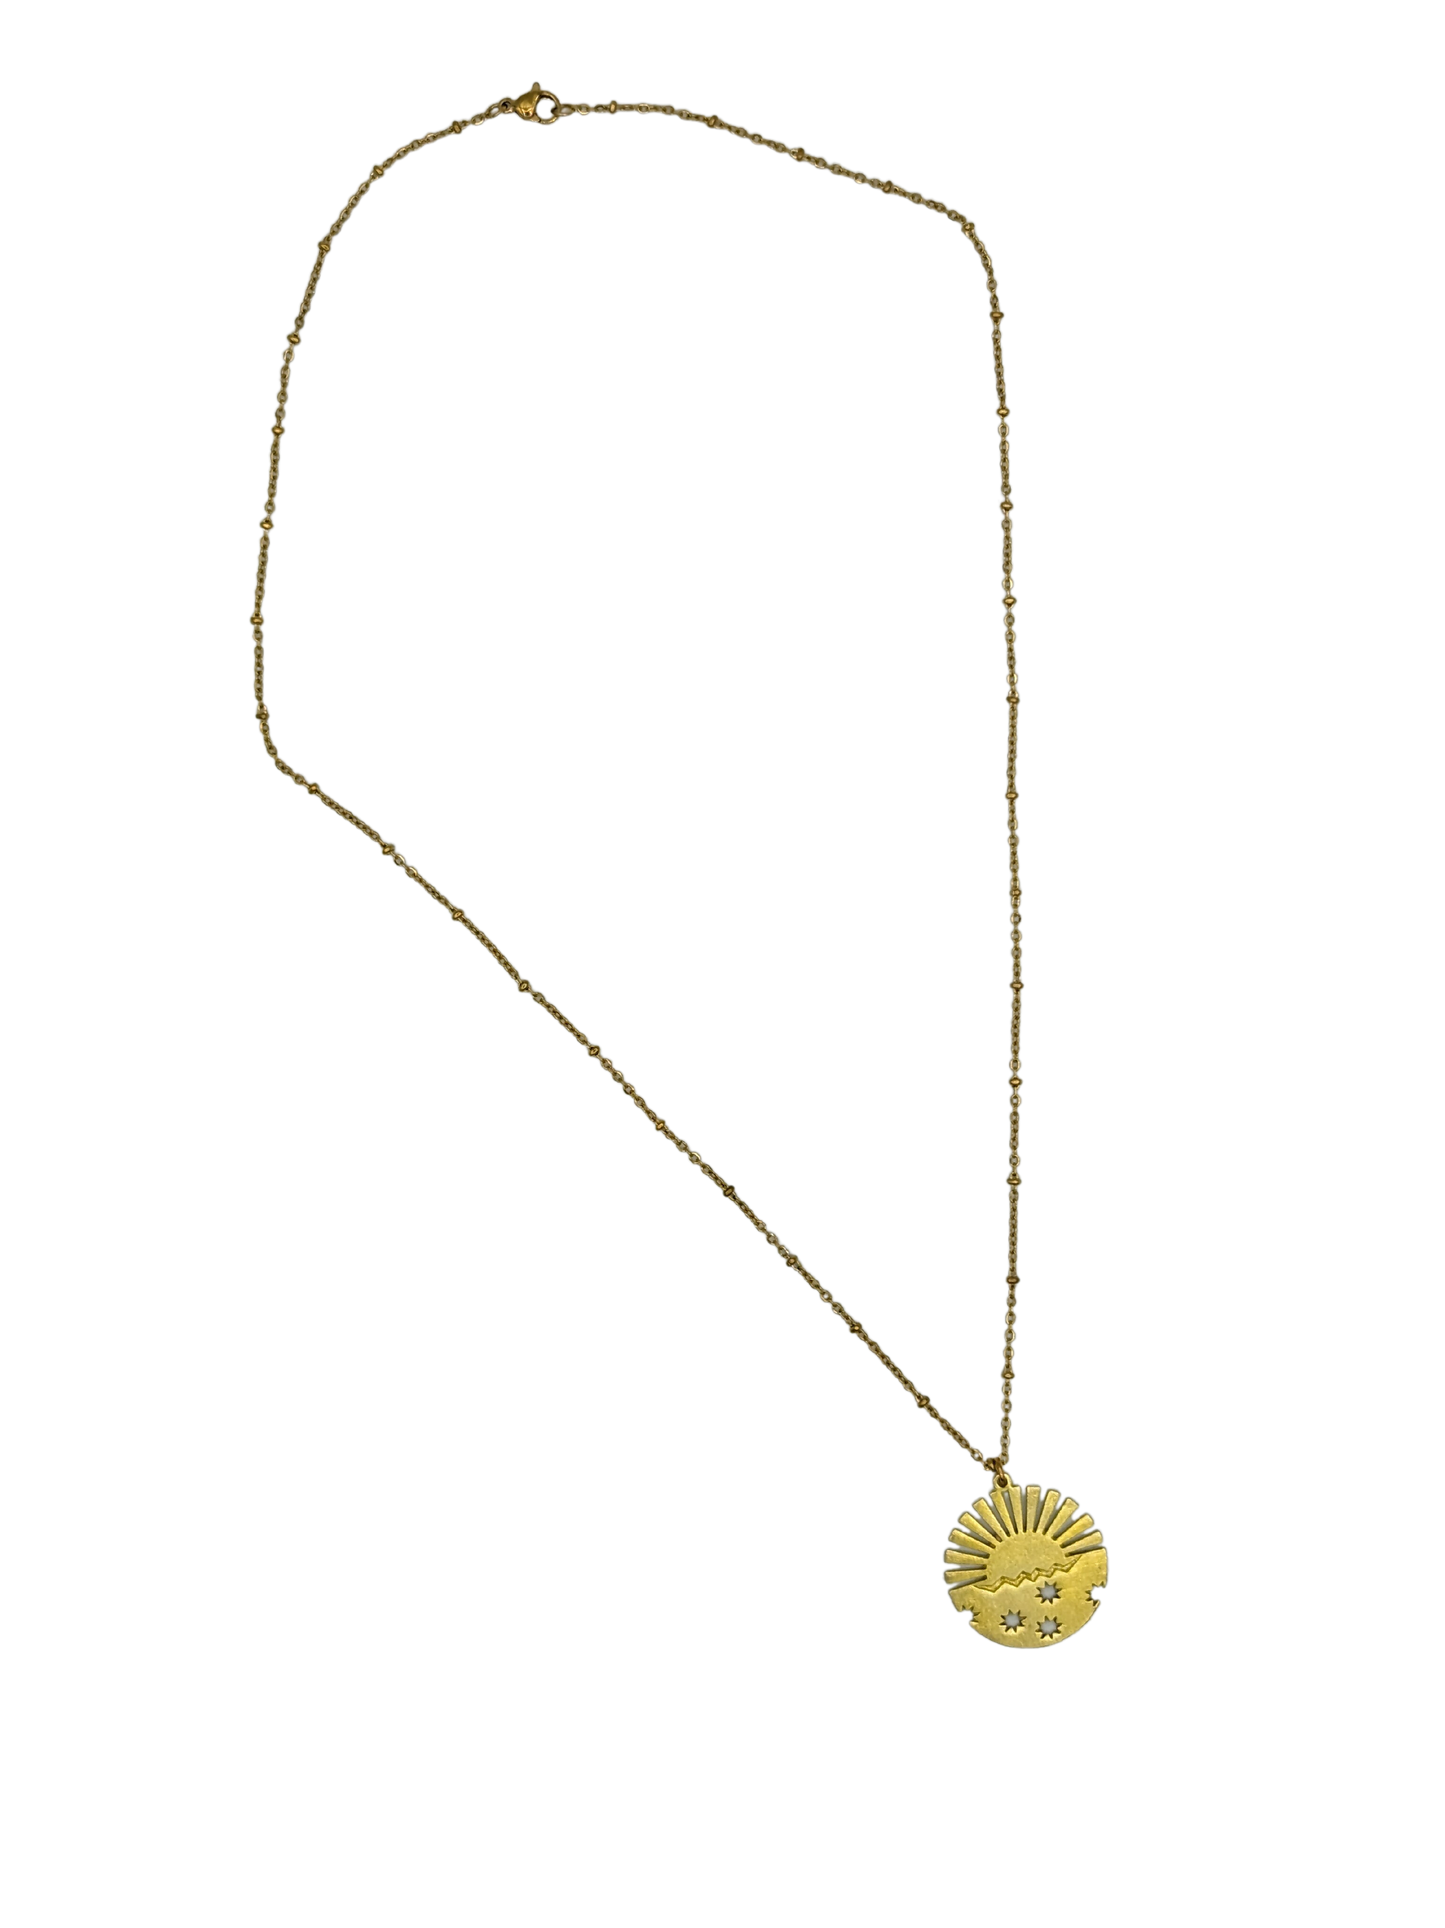 The Radiant Sun Necklace